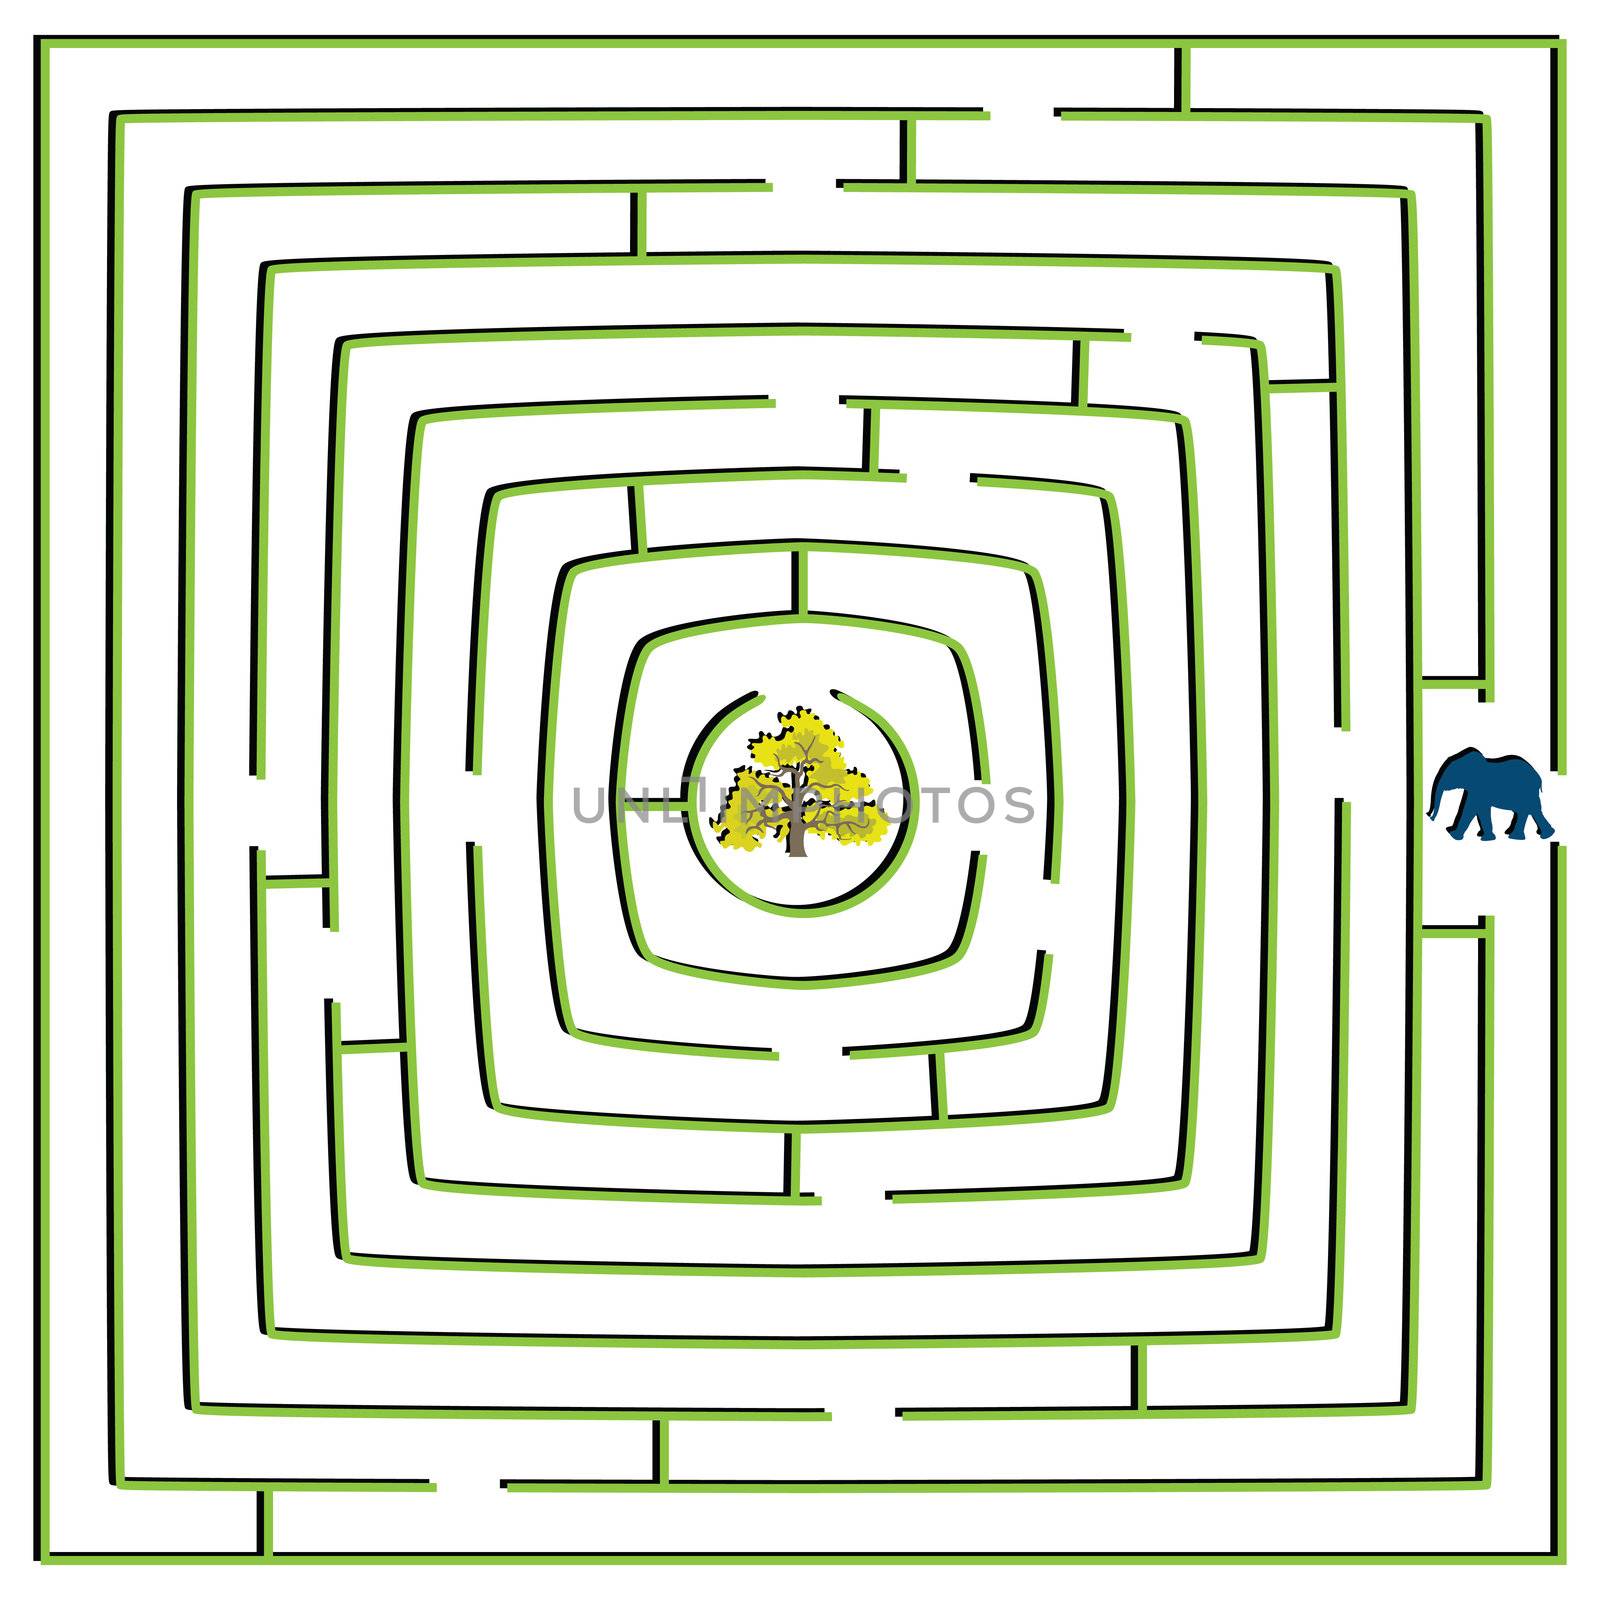 round square maze with elephant and tree, abstract vector art illustration